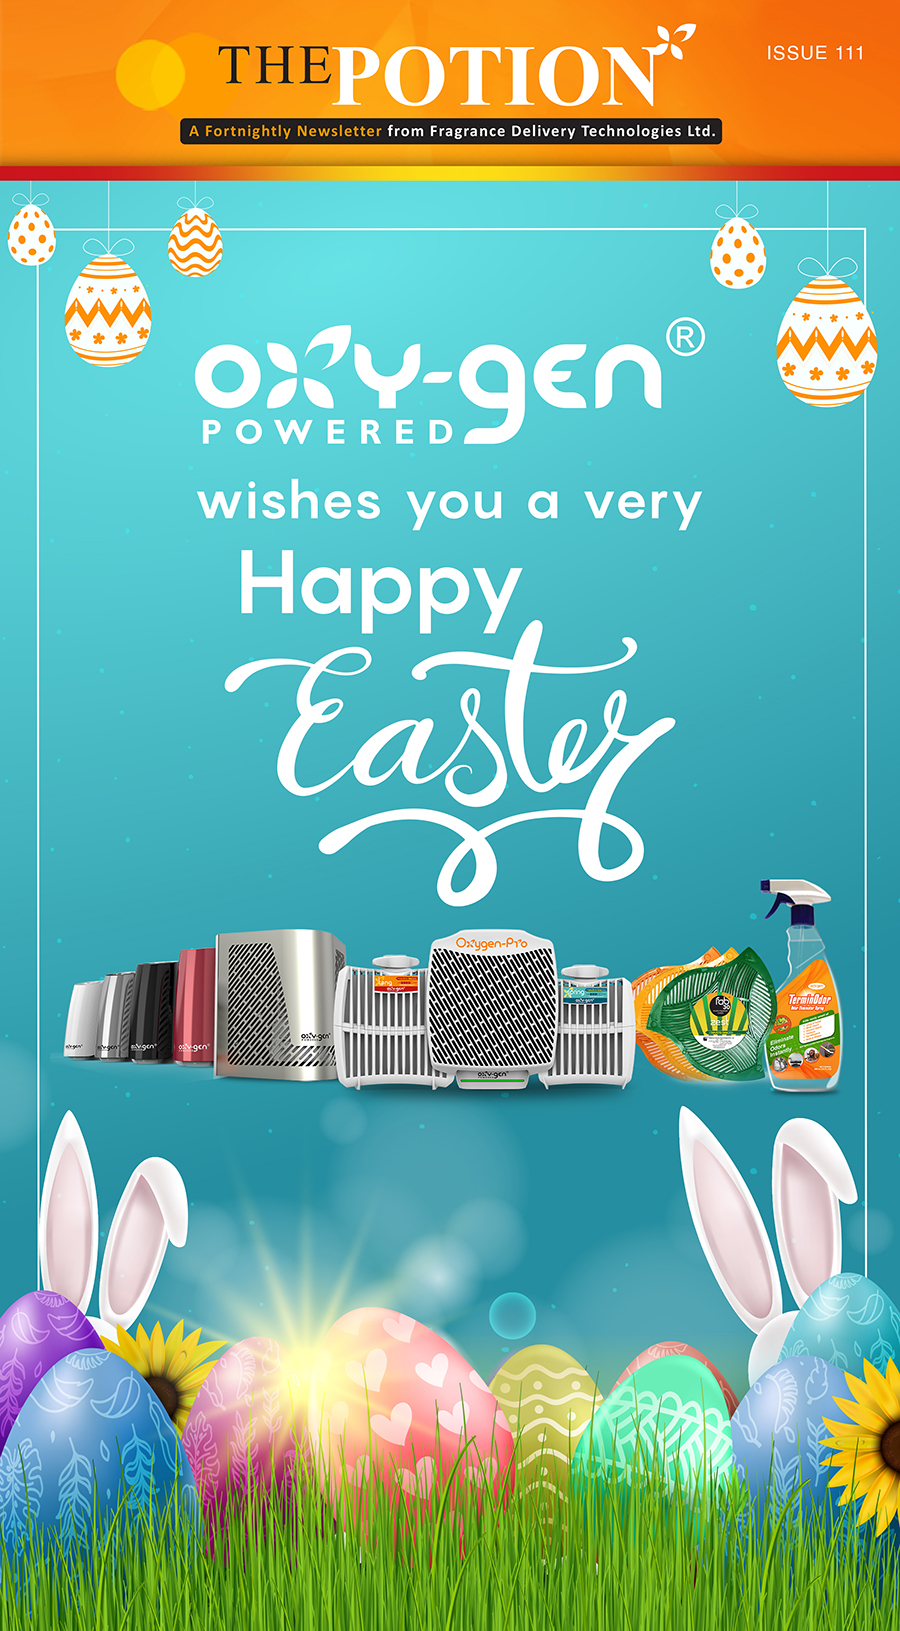 Oxy-Gen Powered wishes you a very Happy Easter - The Potion Issue 111